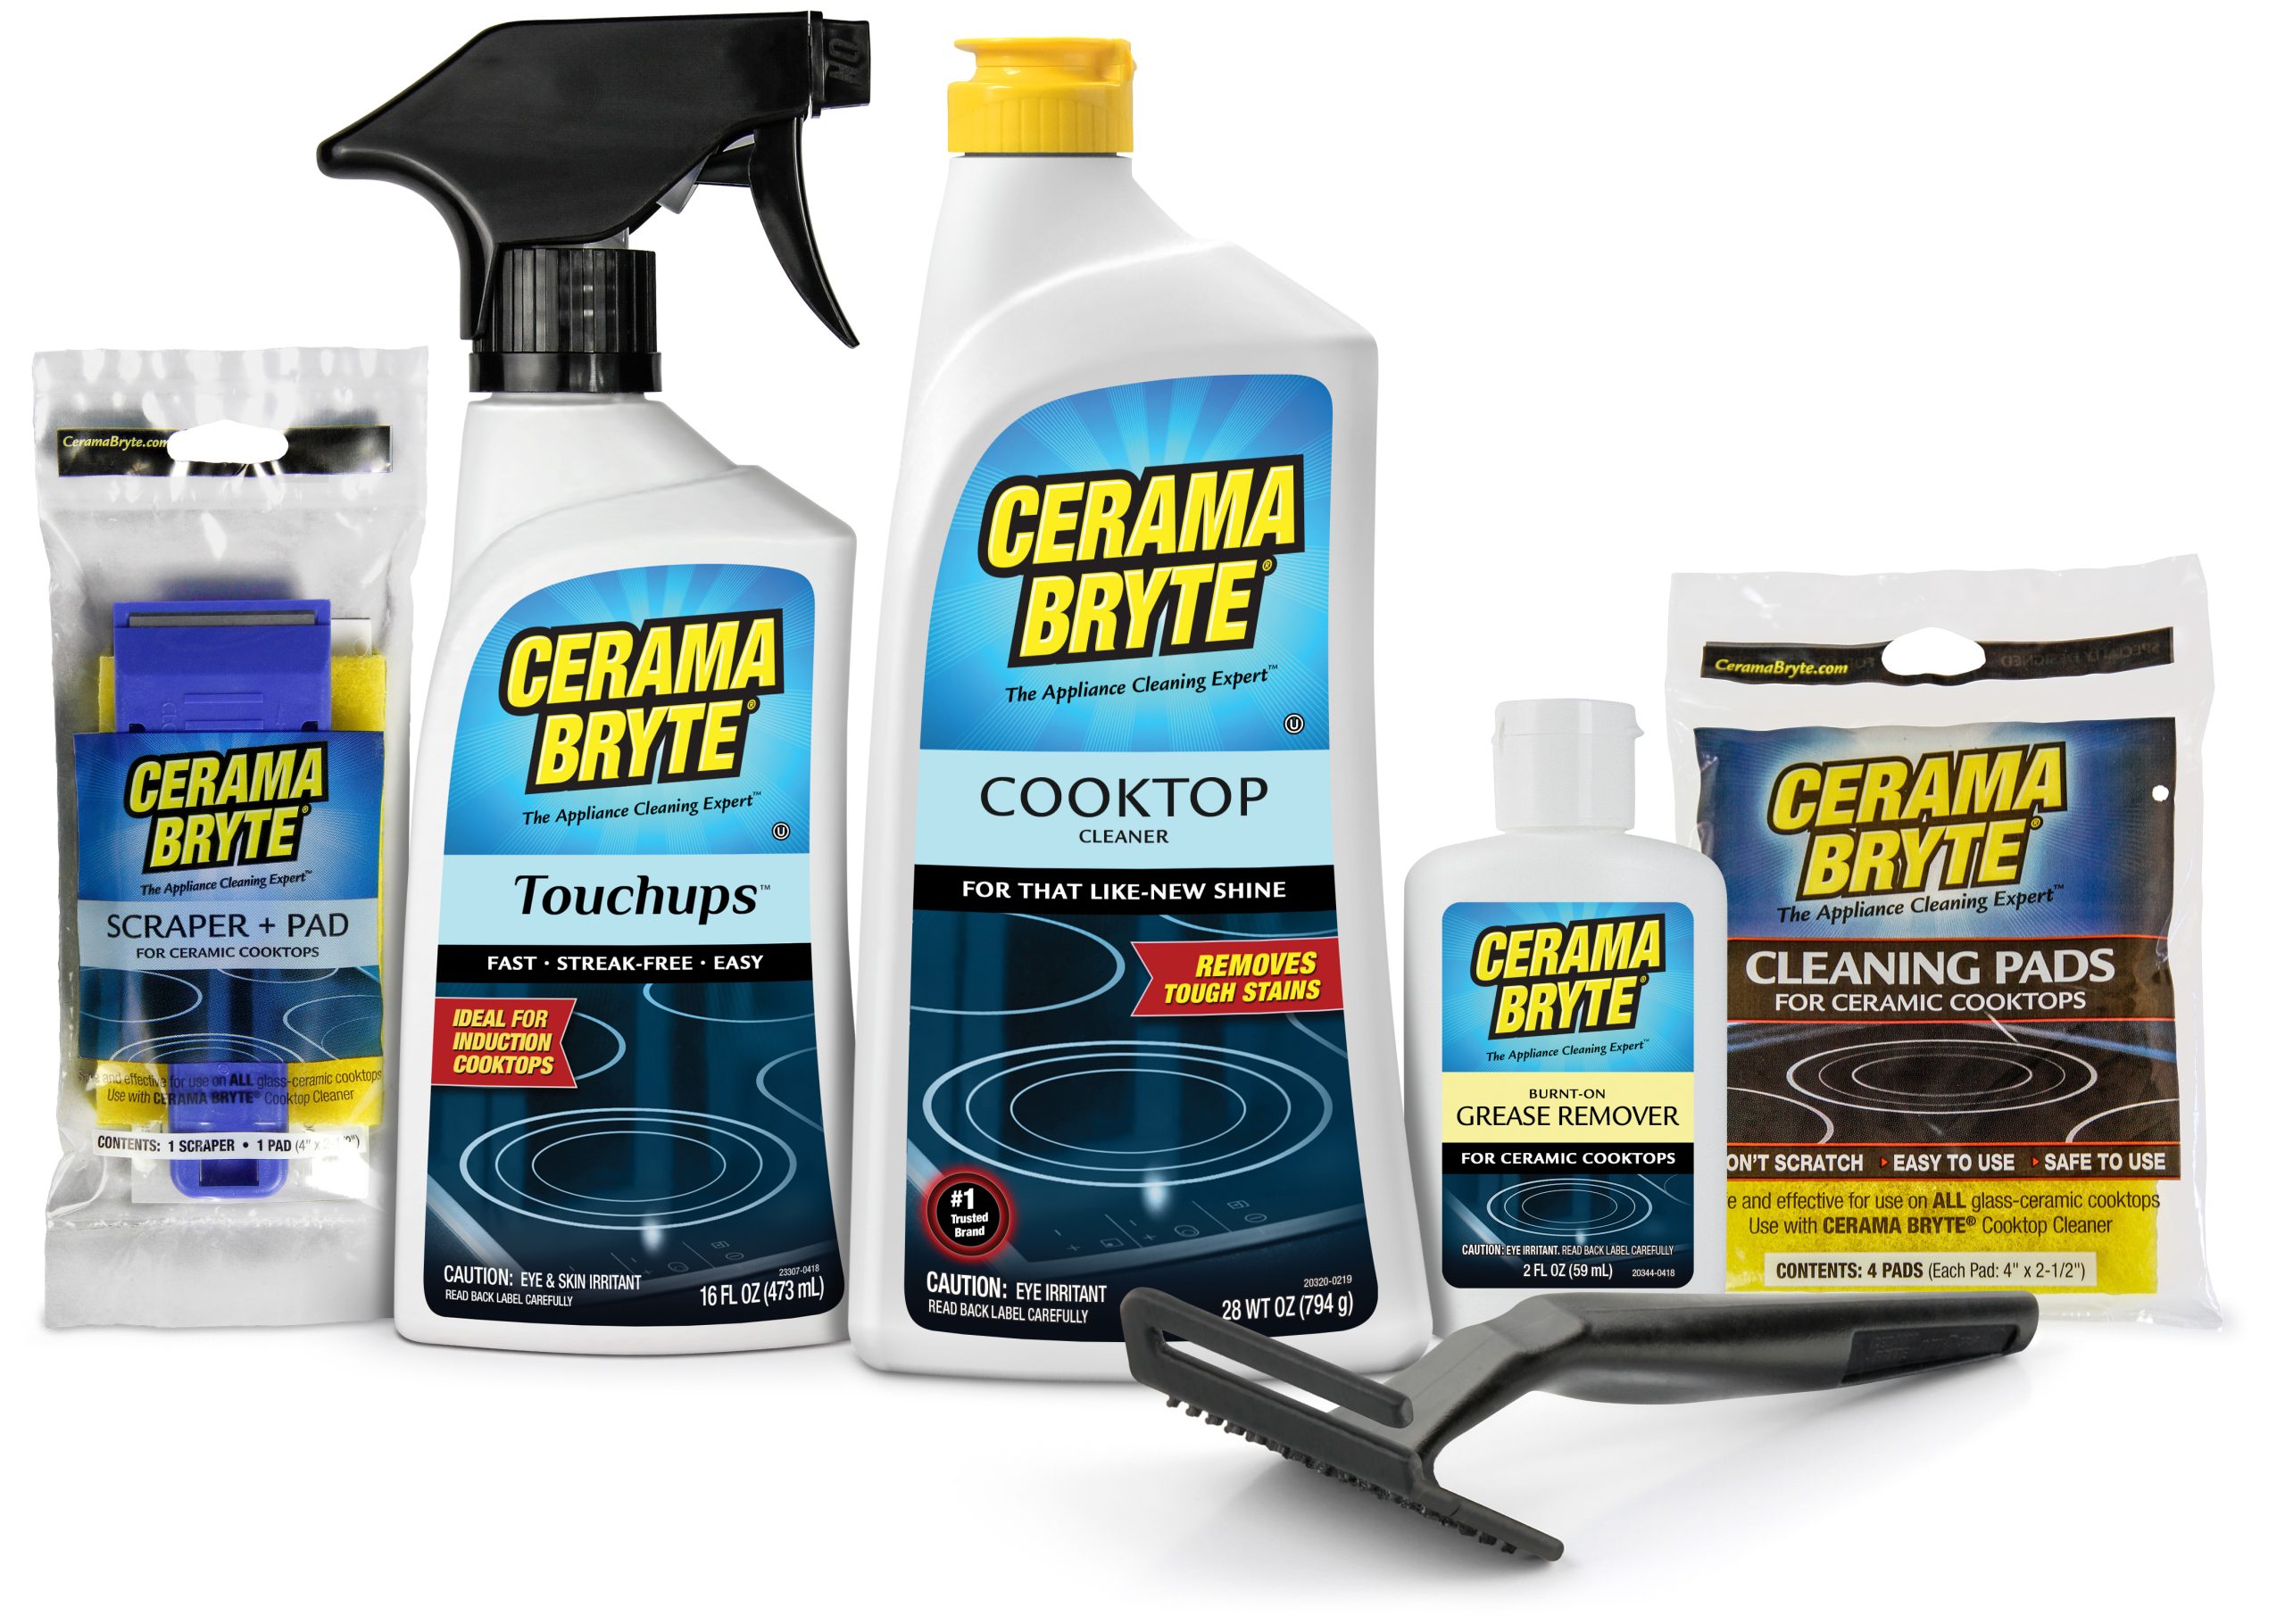 Cooktop Cleaning Kit - Cerama Bryte